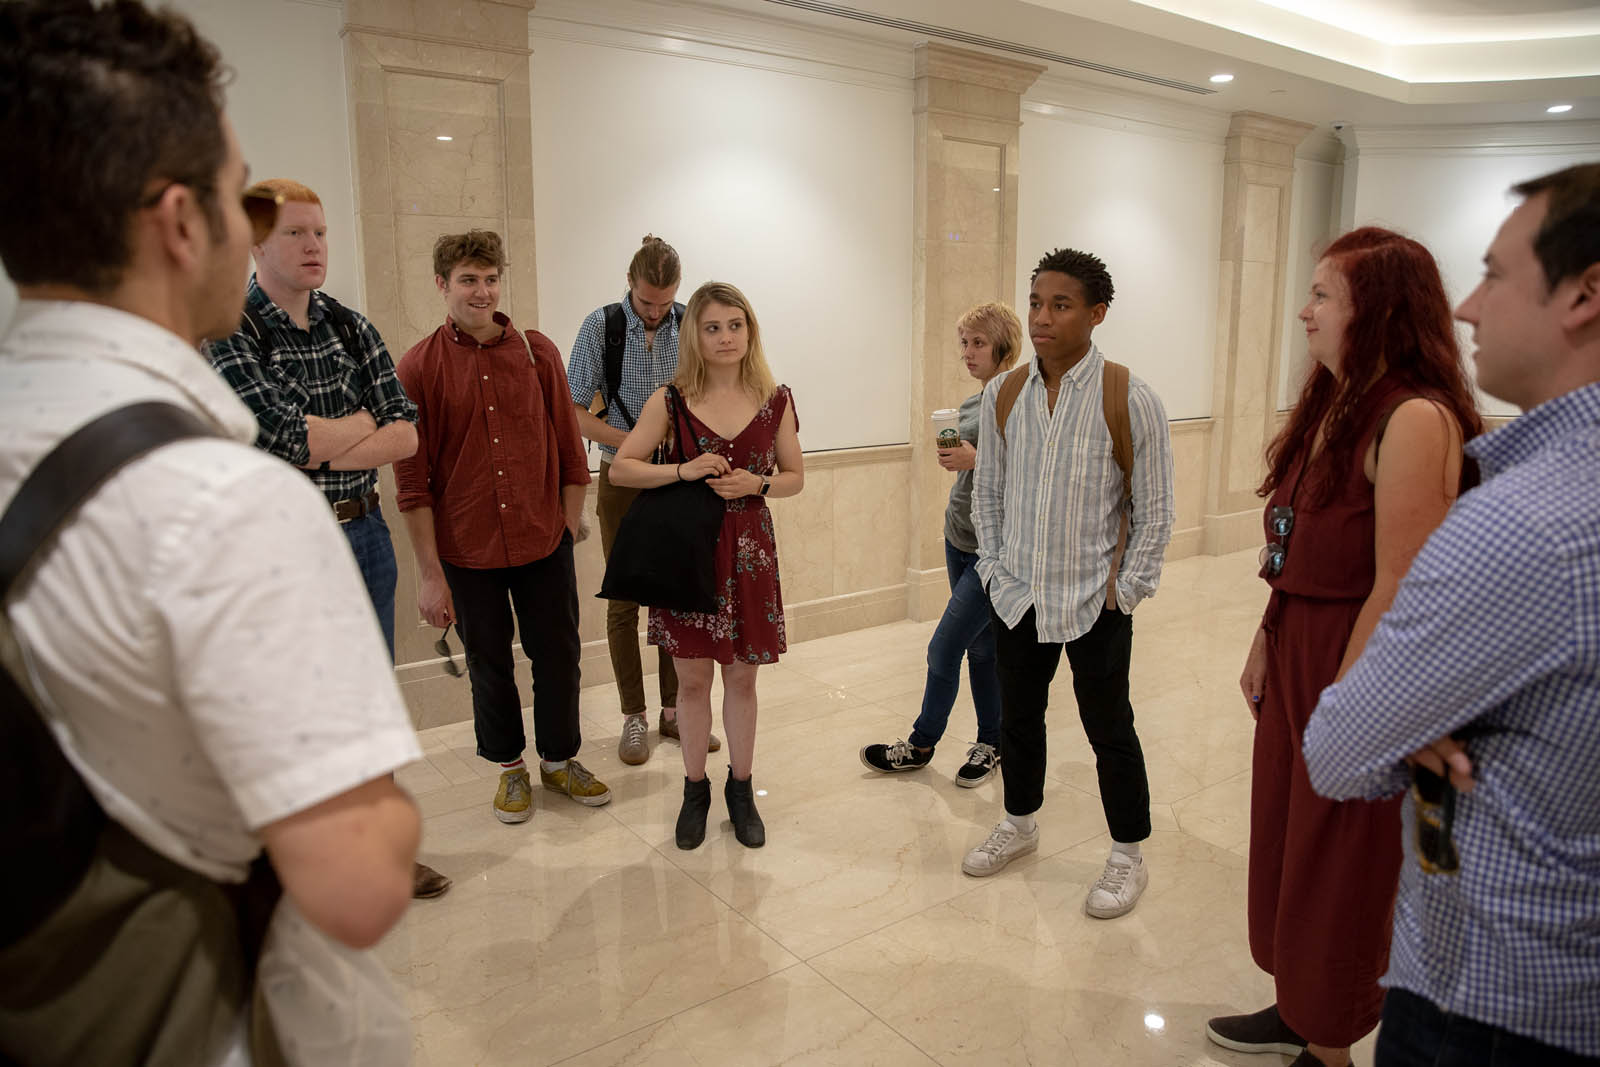 Students in the Introduction to Journalism course speak in the lobby of the New York Times office in Washington, DC, following a visit with Thom Shanker on June 20, 2019. Photo by Lydia Thompson.